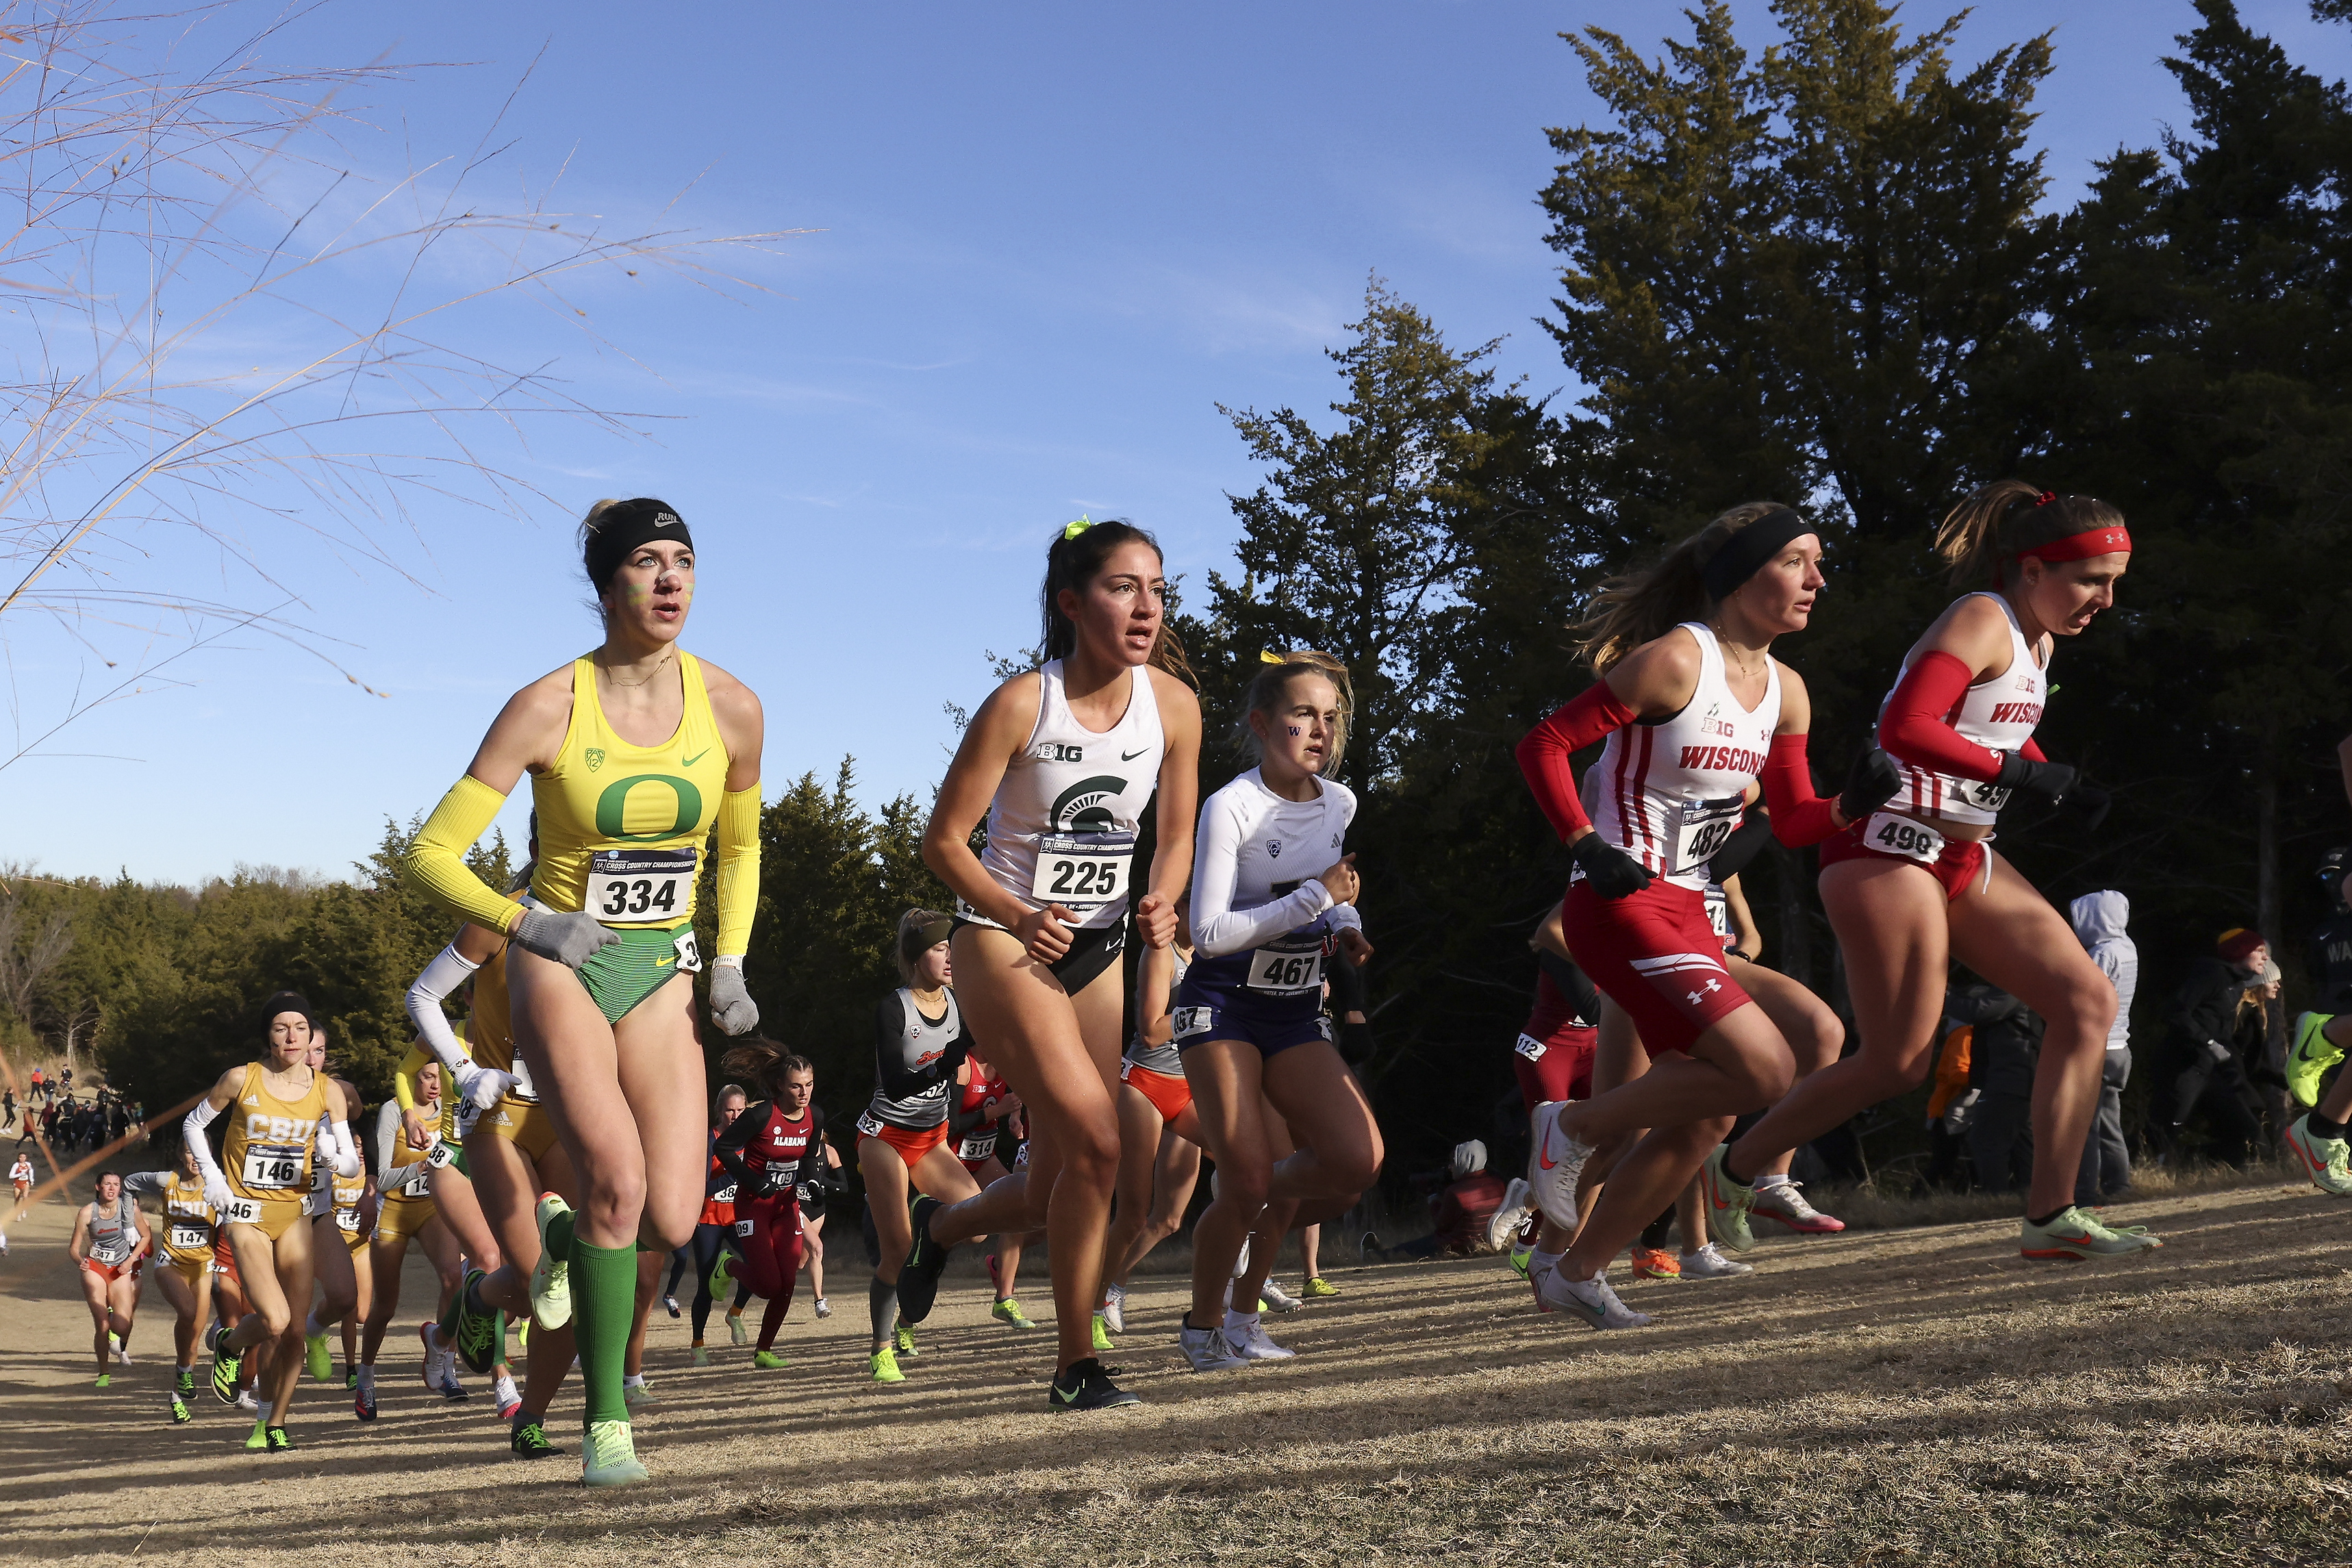 2022 Division I Men’s and Women’s Cross Country Championship